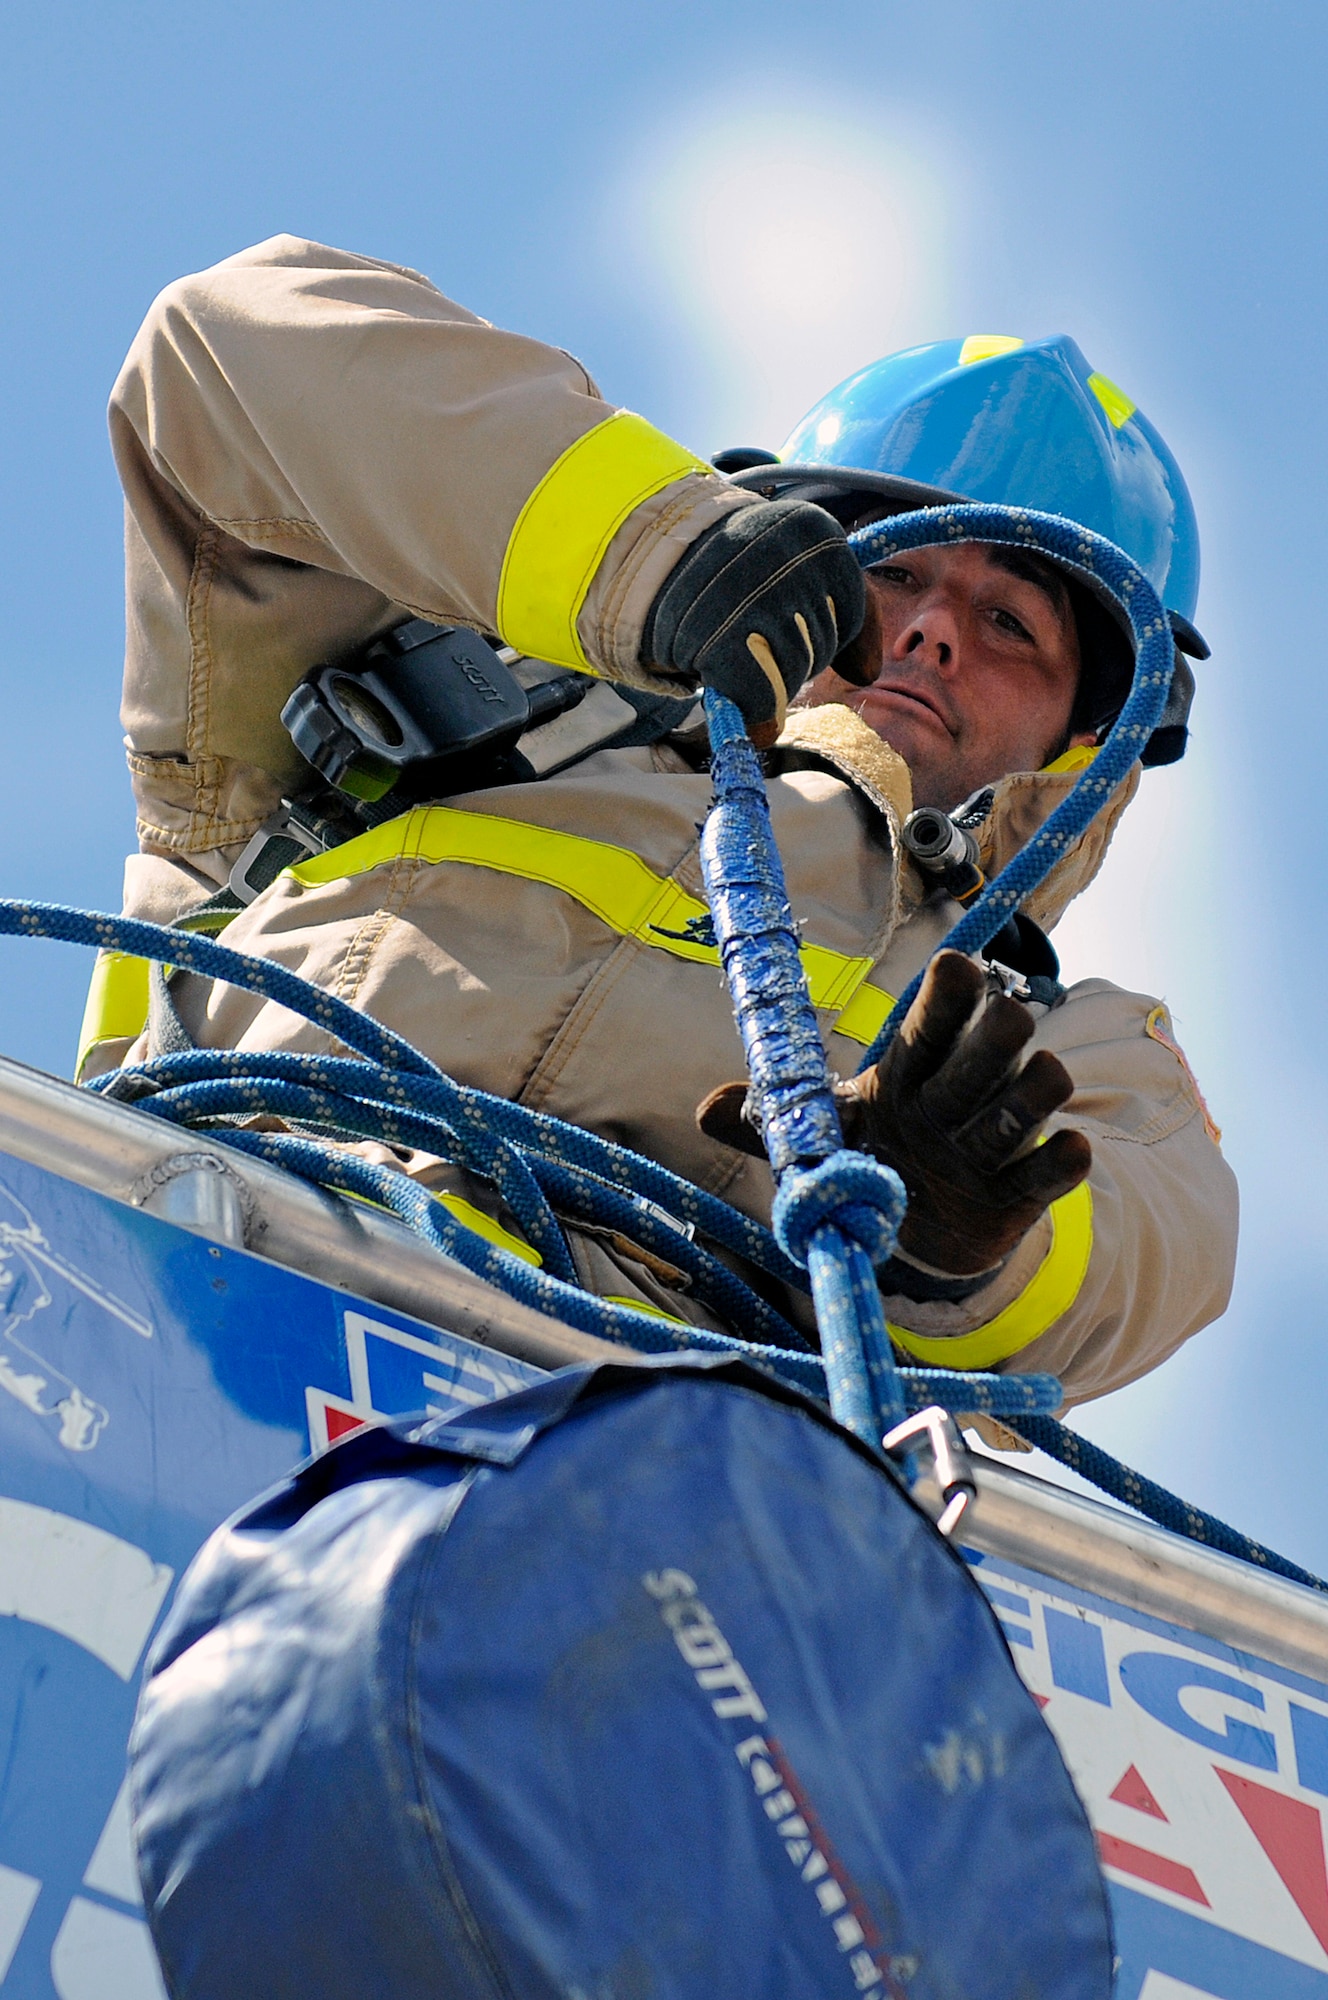 Team USAFA relay member firefighter Steve Hardman hoists a 45-pound hose up a five-story tower during a regional Firefighter Challenge at the U.S. Air Force Academy, Colo., June 27. (U.S. Air Force photo/Mike Kaplan)